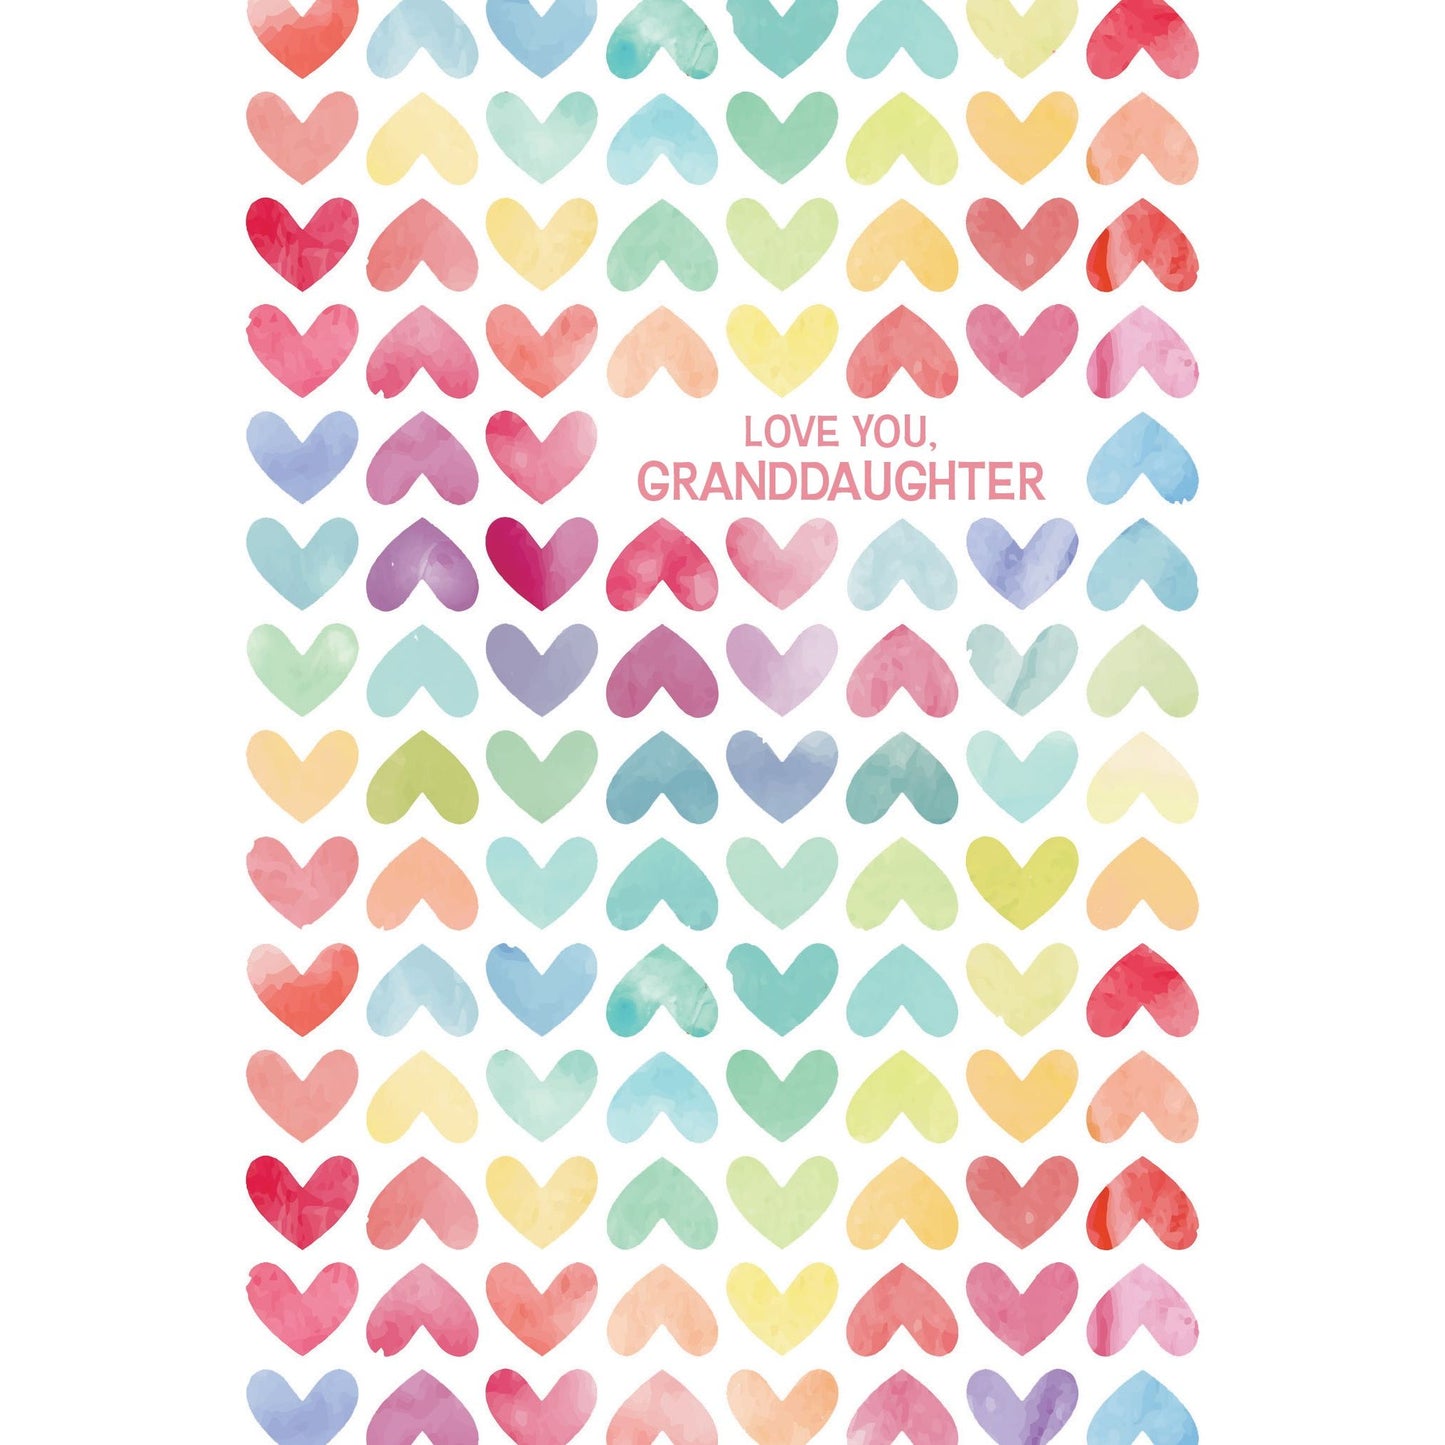 Colorful Hearts Valentine's Day Card Granddaughter